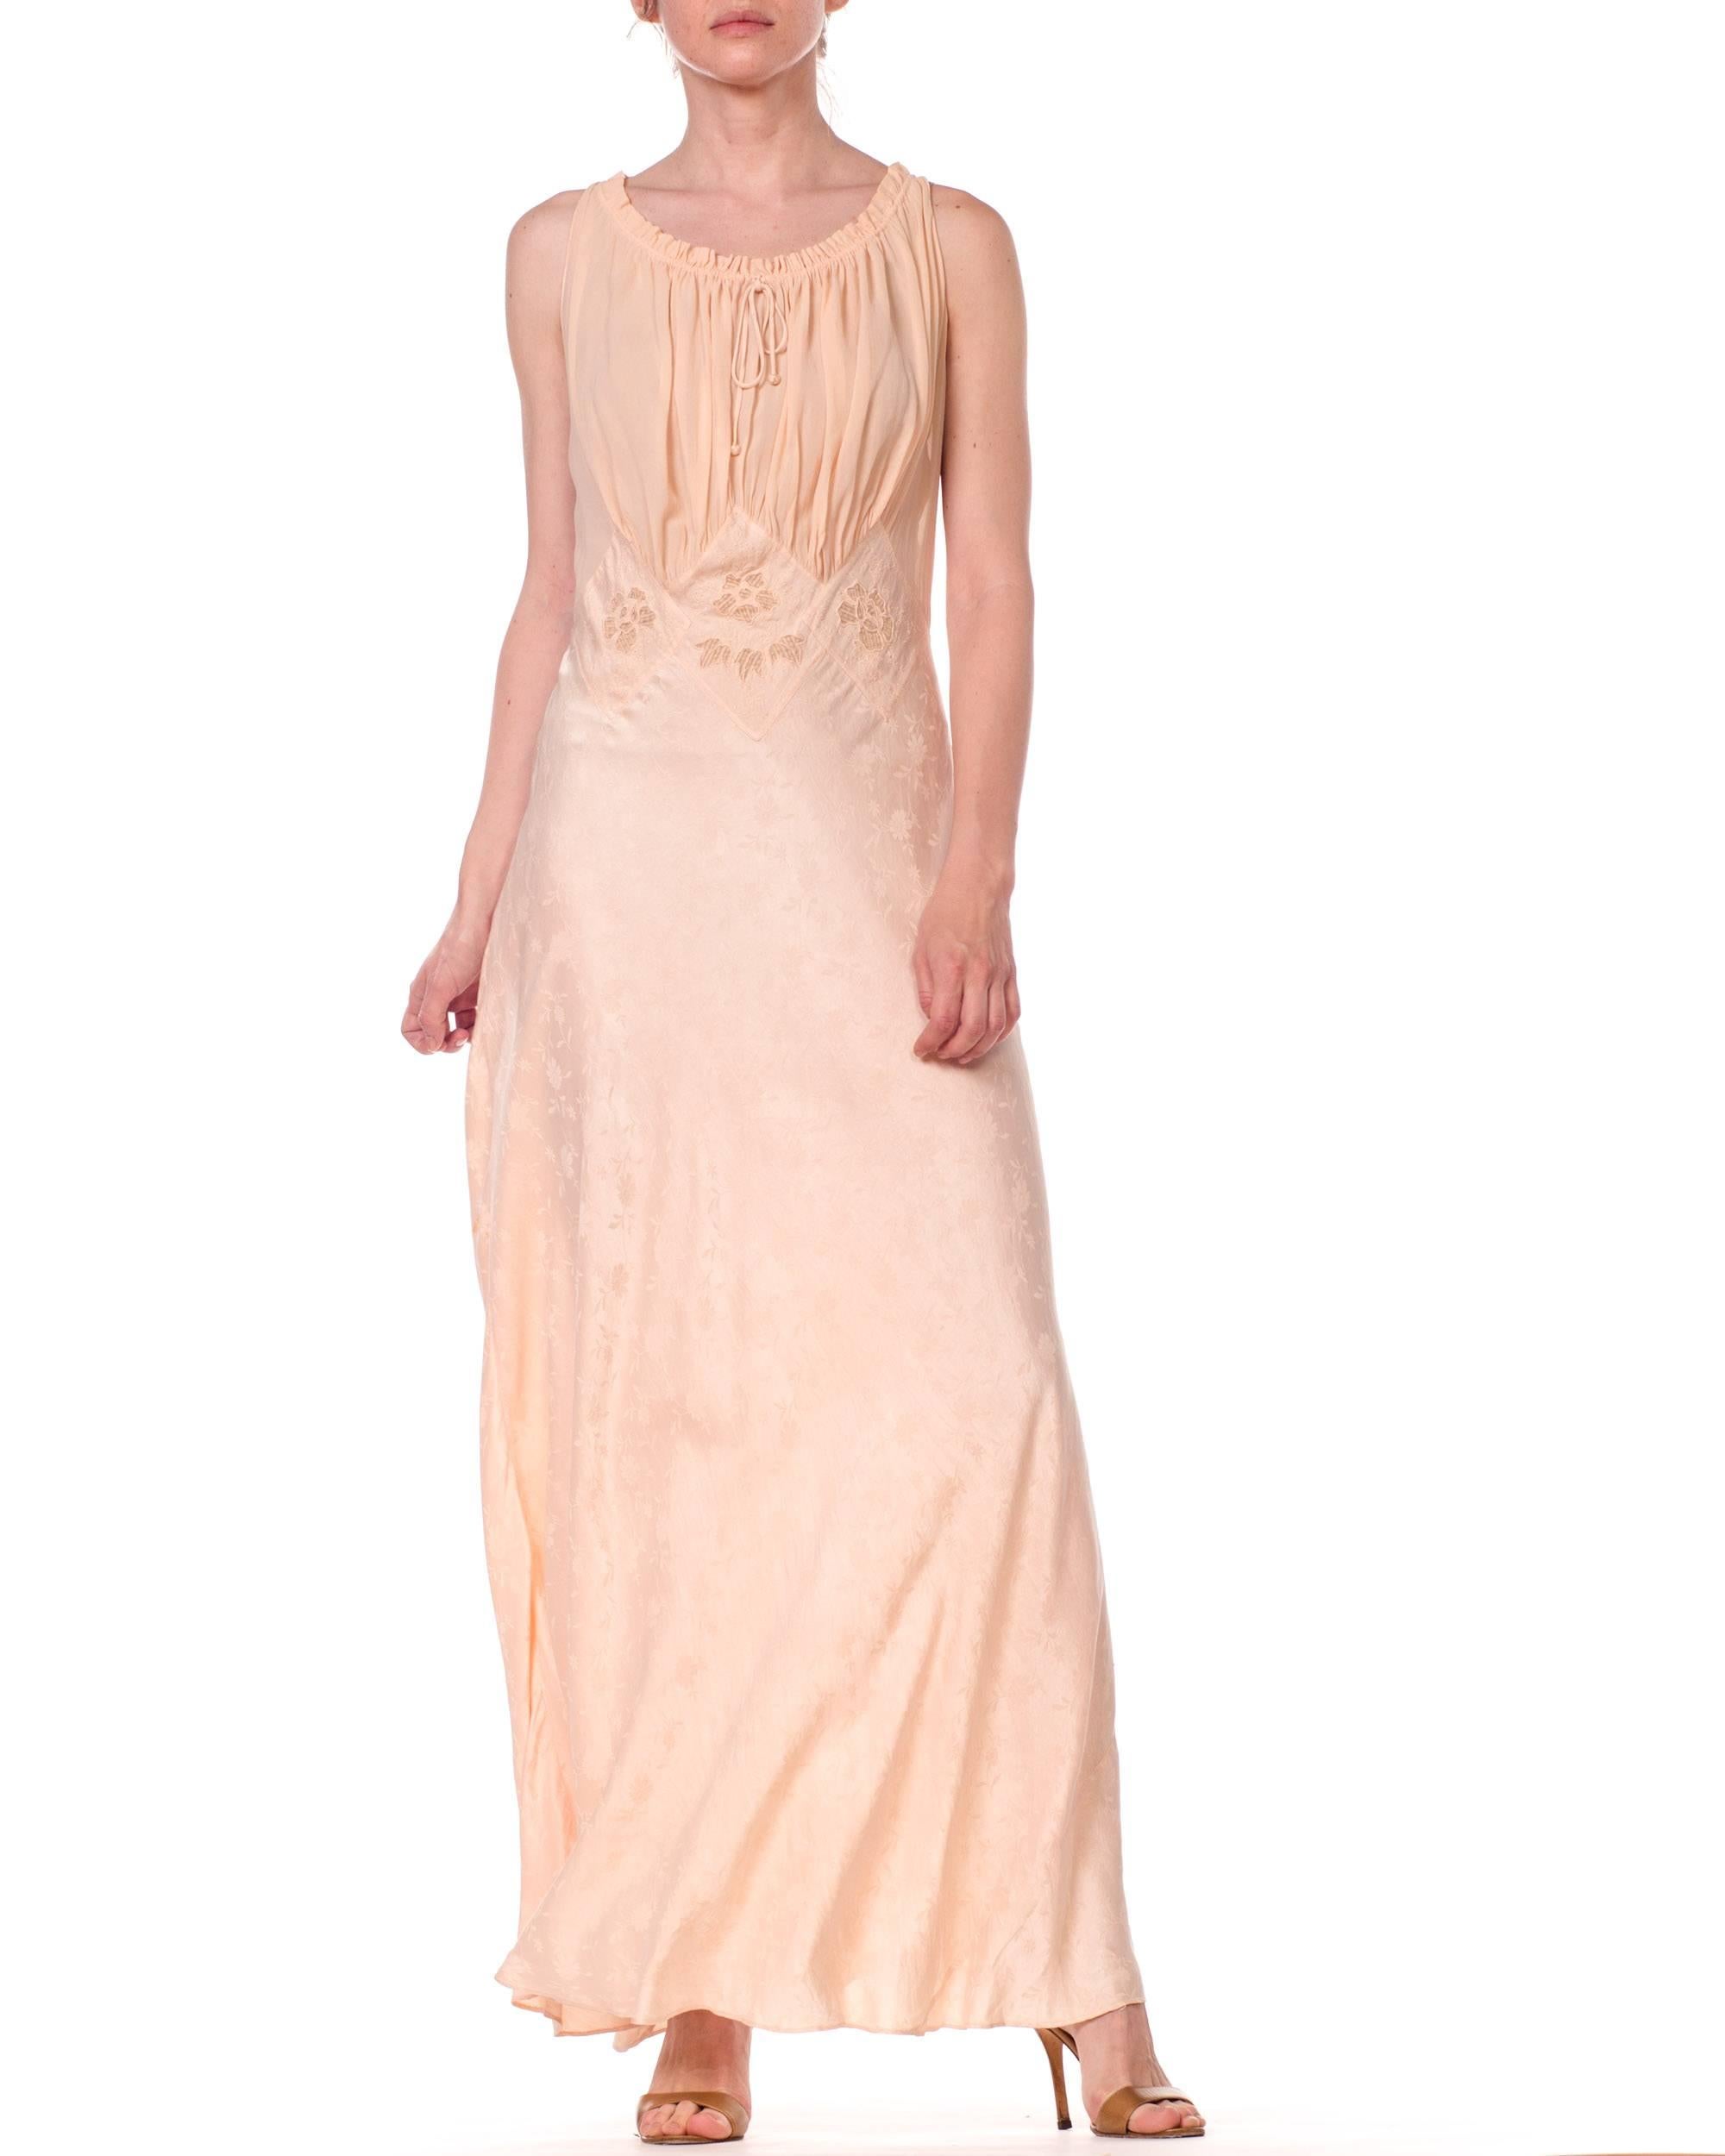 1930s Bias Cut Silk Negligee with Sheer Chiffon & Hand Embroidery 5